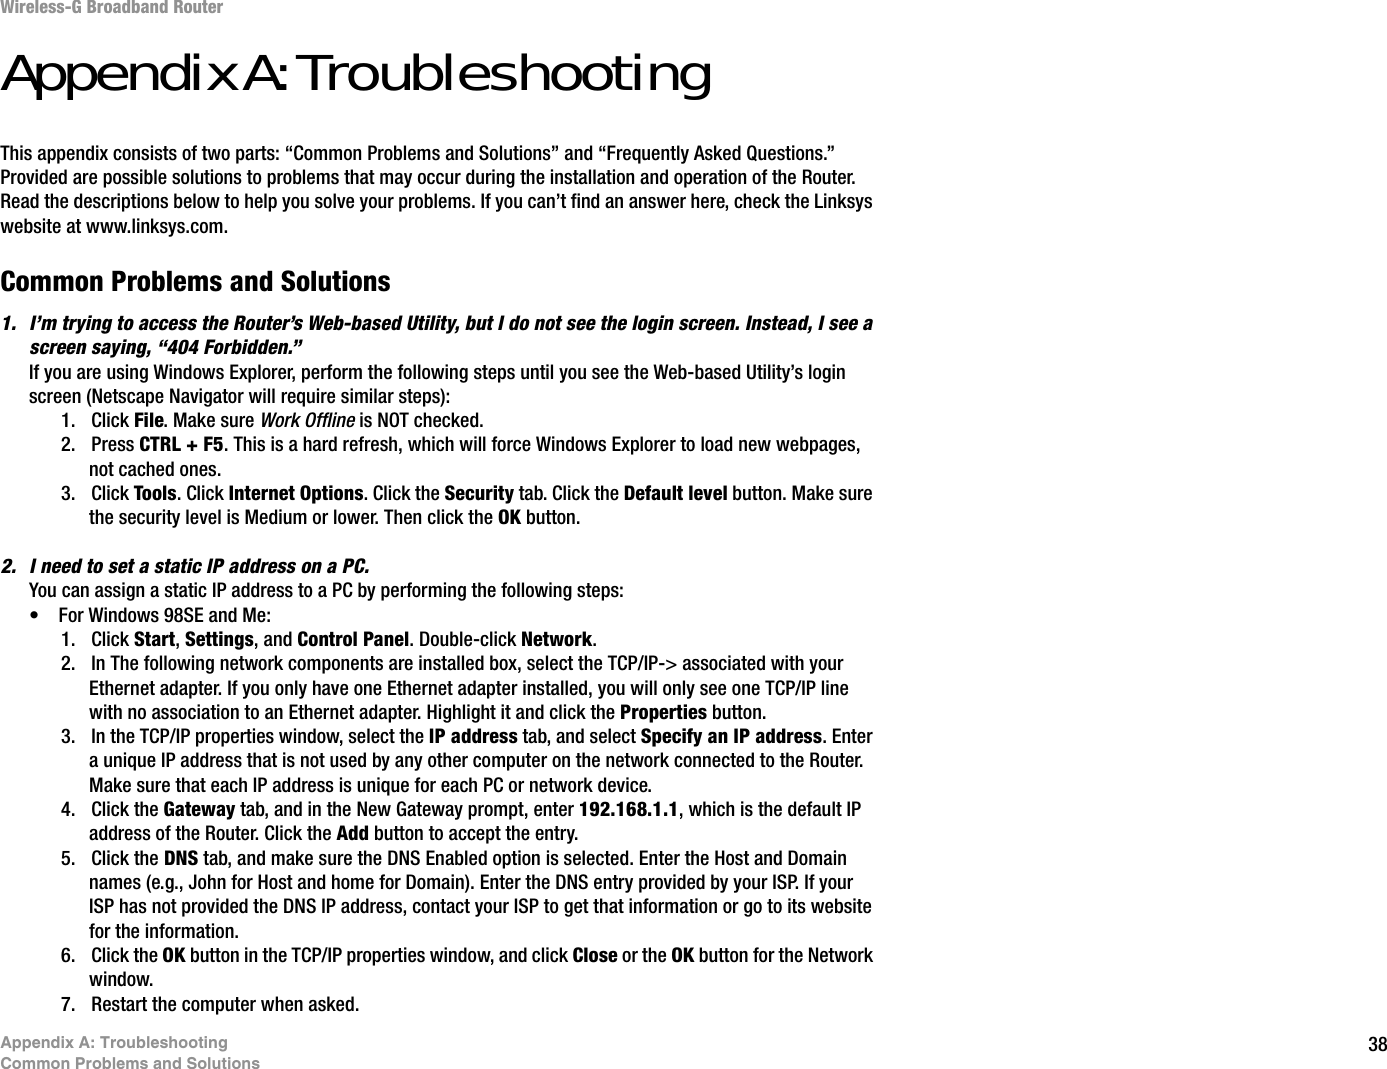 38Appendix A: TroubleshootingCommon Problems and SolutionsWireless-G Broadband RouterAppendix A: TroubleshootingThis appendix consists of two parts: “Common Problems and Solutions” and “Frequently Asked Questions.” Provided are possible solutions to problems that may occur during the installation and operation of the Router. Read the descriptions below to help you solve your problems. If you can’t find an answer here, check the Linksys website at www.linksys.com.Common Problems and Solutions1. I’m trying to access the Router’s Web-based Utility, but I do not see the login screen. Instead, I see a screen saying, “404 Forbidden.”If you are using Windows Explorer, perform the following steps until you see the Web-based Utility’s login screen (Netscape Navigator will require similar steps):1. Click File. Make sure Work Offline is NOT checked.2. Press CTRL + F5. This is a hard refresh, which will force Windows Explorer to load new webpages, not cached ones.3. Click Tools. Click Internet Options. Click the Security tab. Click the Default level button. Make sure the security level is Medium or lower. Then click the OK button.2. I need to set a static IP address on a PC.You can assign a static IP address to a PC by performing the following steps:• For Windows 98SE and Me:1. Click Start,Settings, and Control Panel. Double-click Network.2. In The following network components are installed box, select the TCP/IP-&gt; associated with your Ethernet adapter. If you only have one Ethernet adapter installed, you will only see one TCP/IP line with no association to an Ethernet adapter. Highlight it and click the Properties button.3. In the TCP/IP properties window, select the IP address tab, and select Specify an IP address. Enter a unique IP address that is not used by any other computer on the network connected to the Router. Make sure that each IP address is unique for each PC or network device.4. Click the Gateway tab, and in the New Gateway prompt, enter 192.168.1.1, which is the default IP address of the Router. Click the Add button to accept the entry.5. Click the DNS tab, and make sure the DNS Enabled option is selected. Enter the Host and Domain names (e.g., John for Host and home for Domain). Enter the DNS entry provided by your ISP. If your ISP has not provided the DNS IP address, contact your ISP to get that information or go to its website for the information.6. Click the OK button in the TCP/IP properties window, and click Close or the OK button for the Network window.7. Restart the computer when asked.